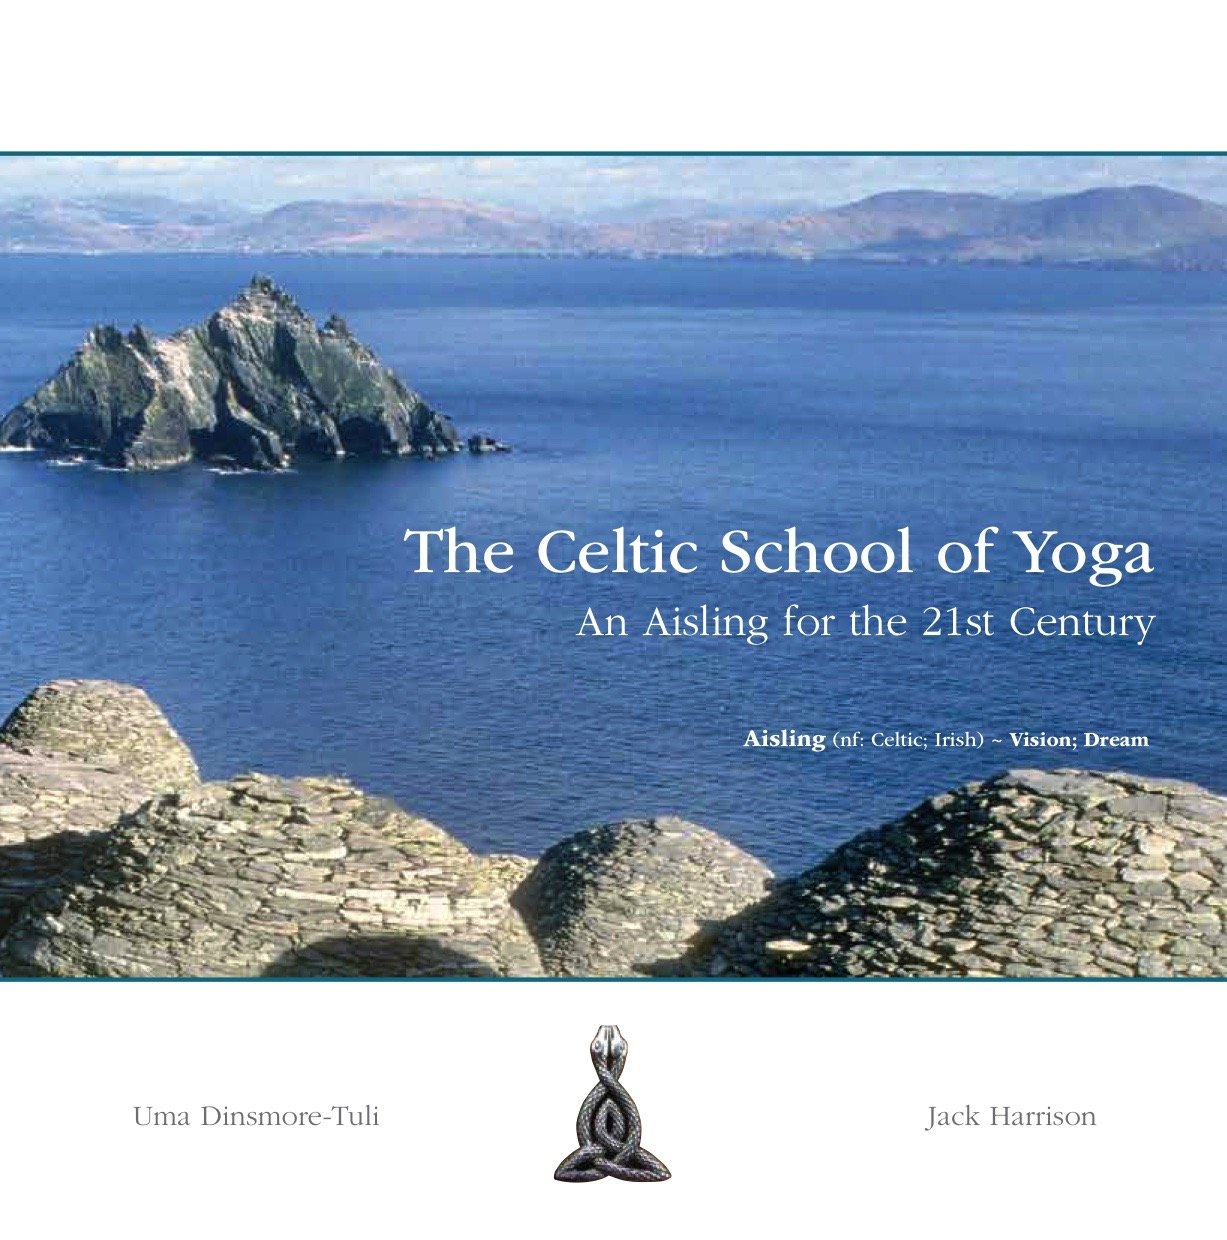 The Celtic School of Yoga: An Aisling for the 21st Century